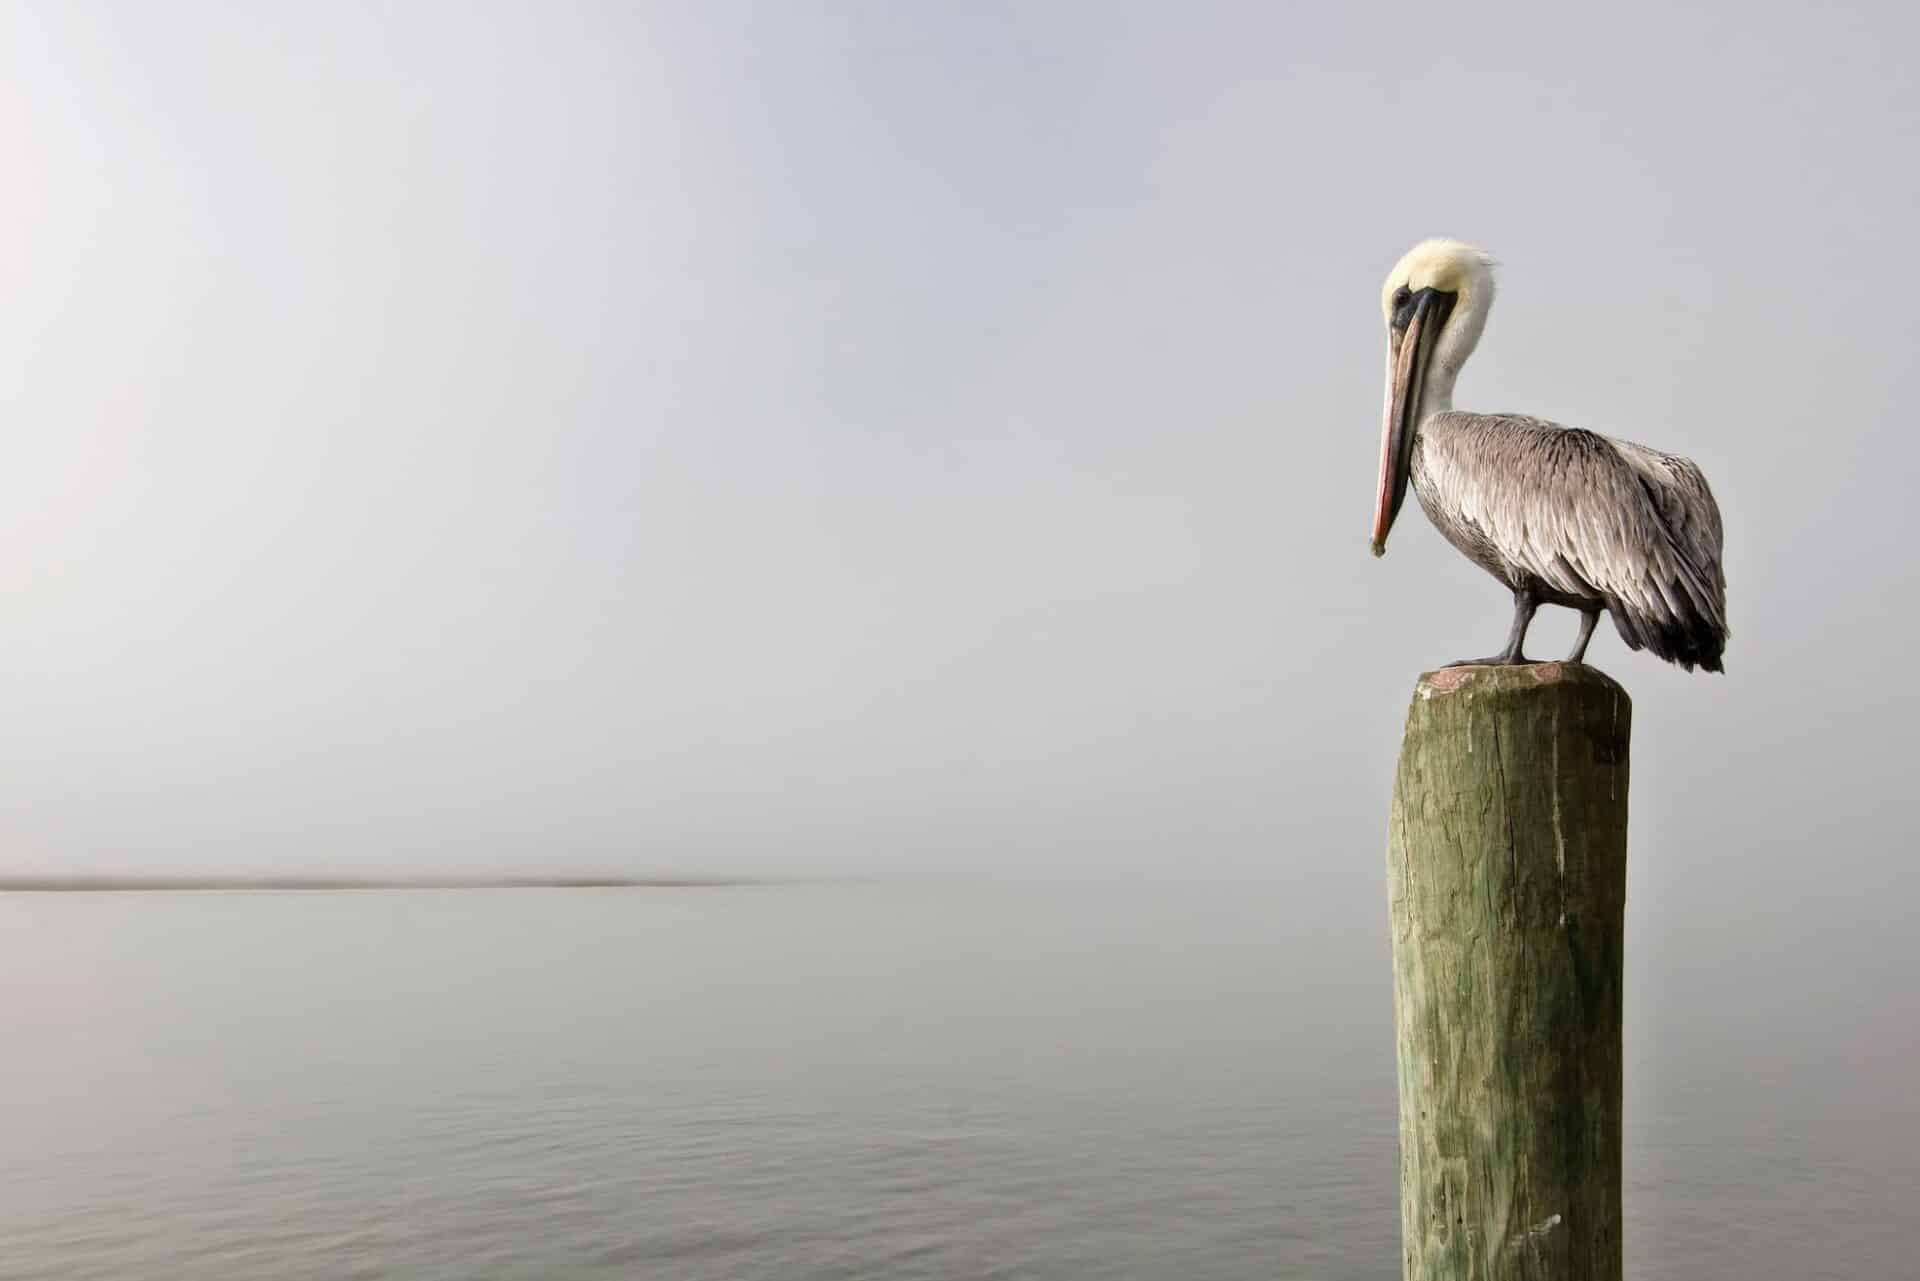 gray pelican on piling